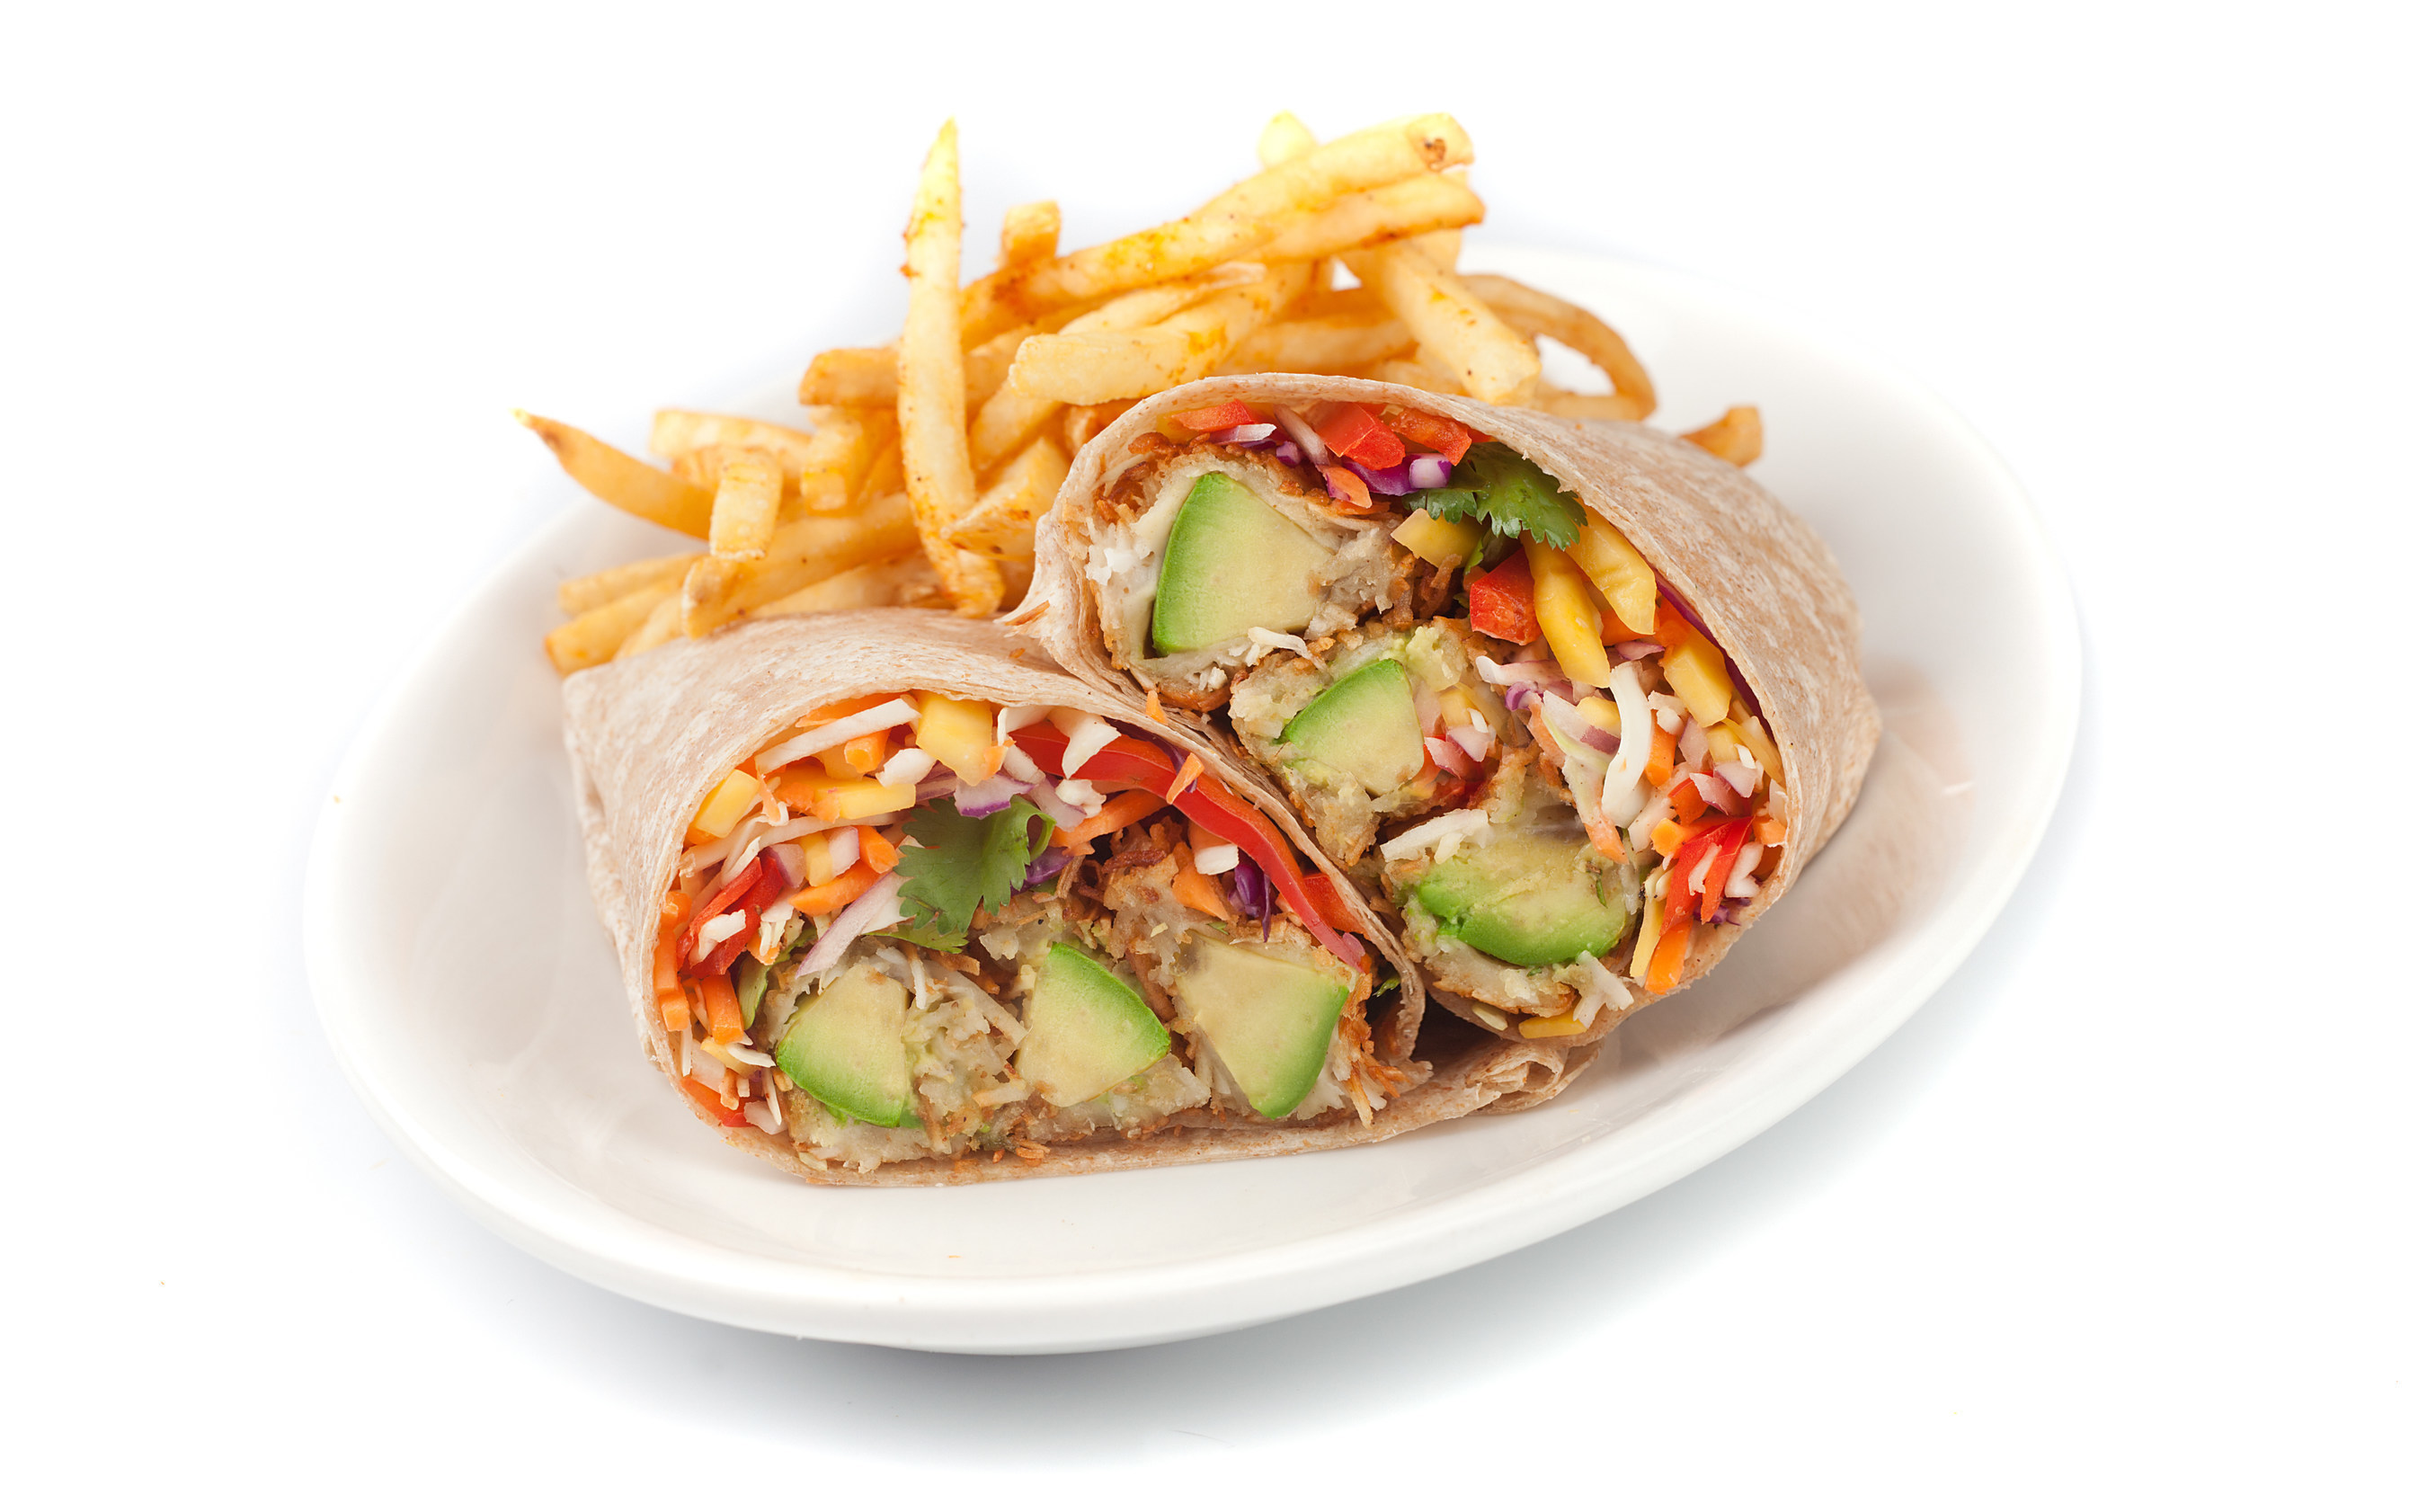 Avocado Crunch Wrap featured on new Seasonal Menu at Native Foods Cafe